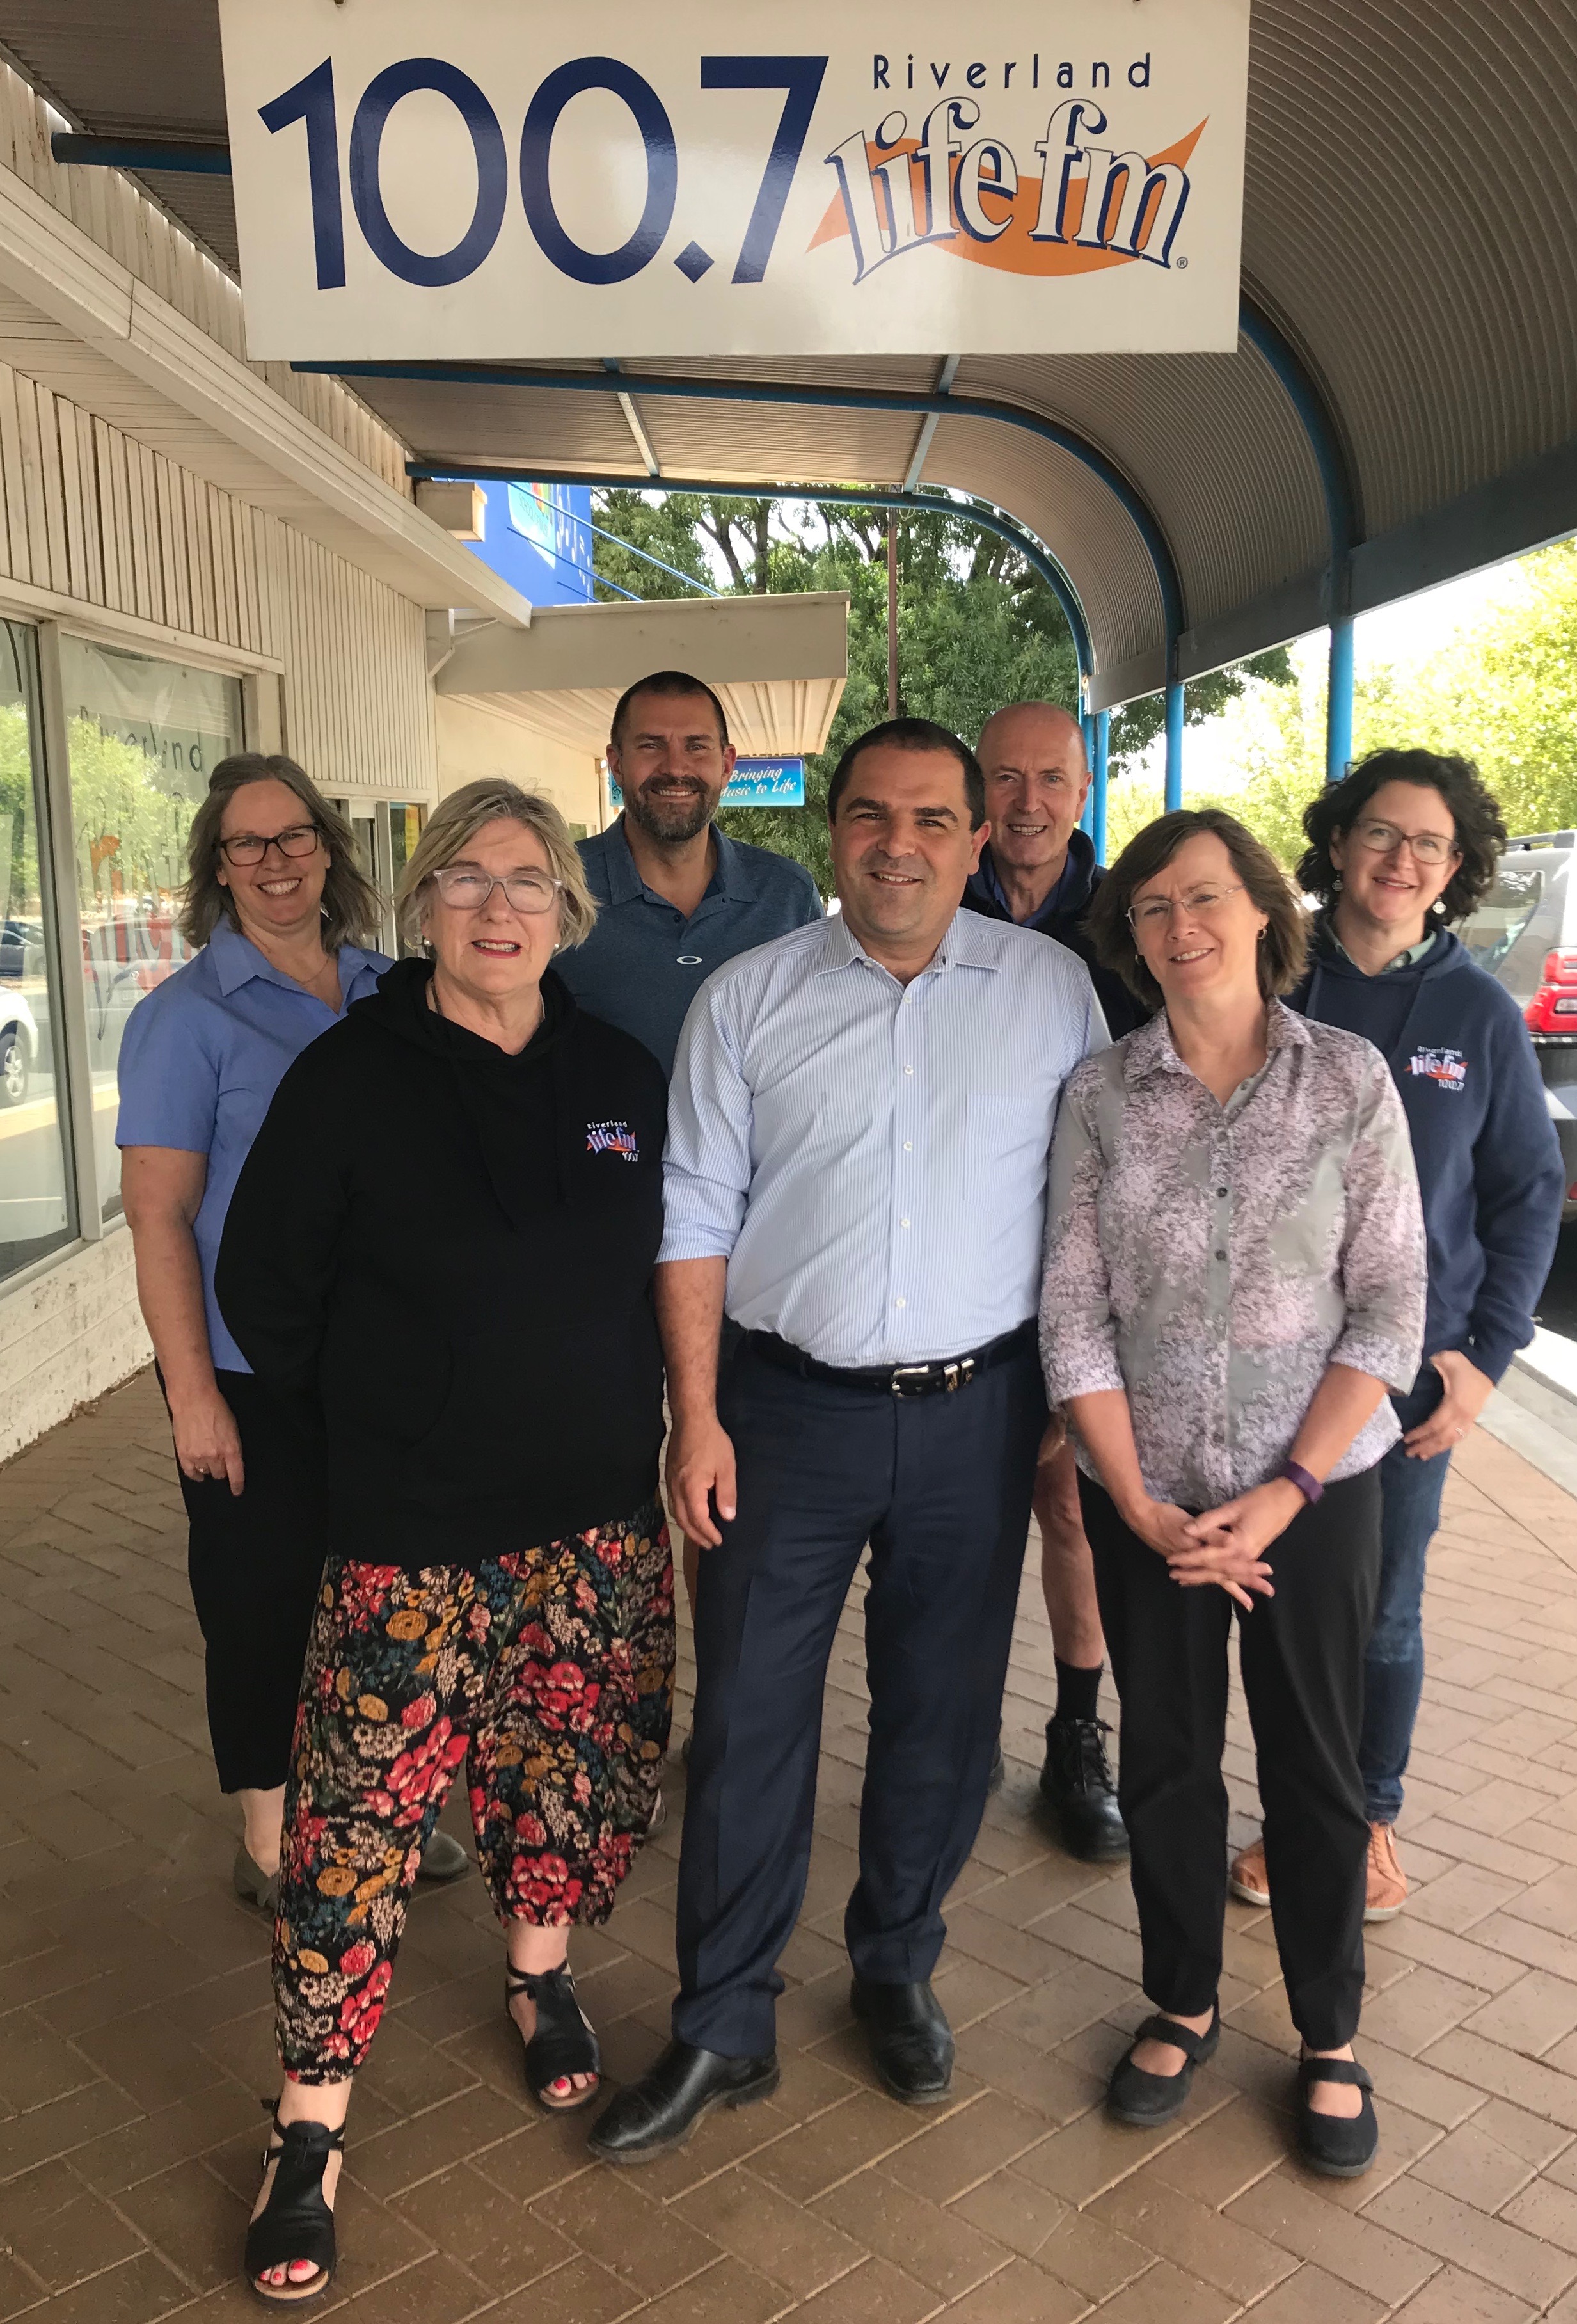 BUILDING STRONGER COMMUNITIES IN THE RIVERLAND